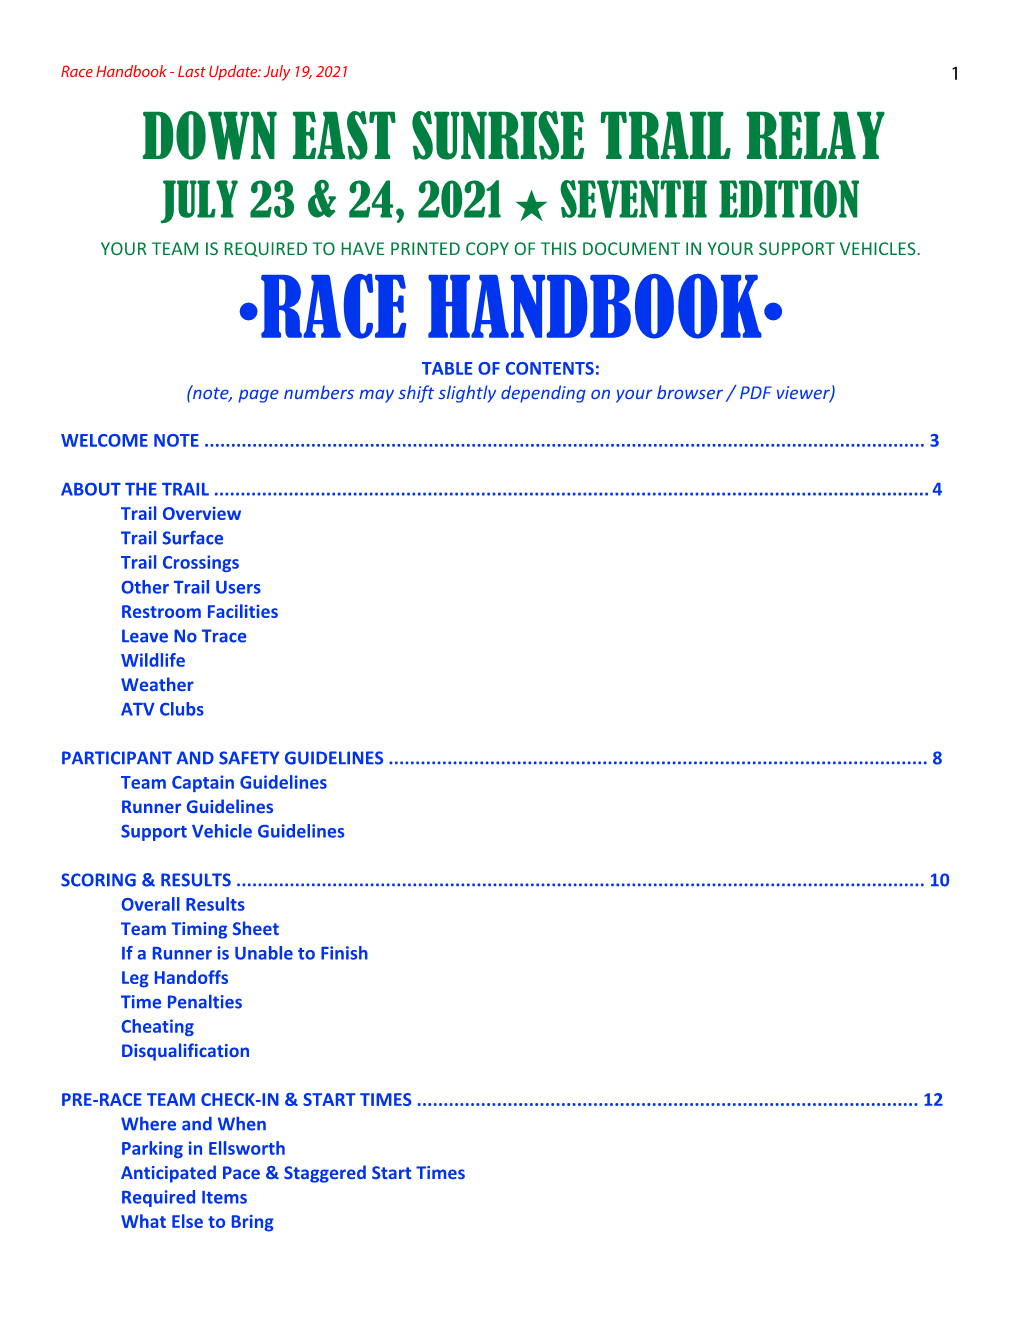 •RACE HANDBOOK• TABLE of CONTENTS: (Note, Page Numbers May Shift Slightly Depending on Your Browser / PDF Viewer)